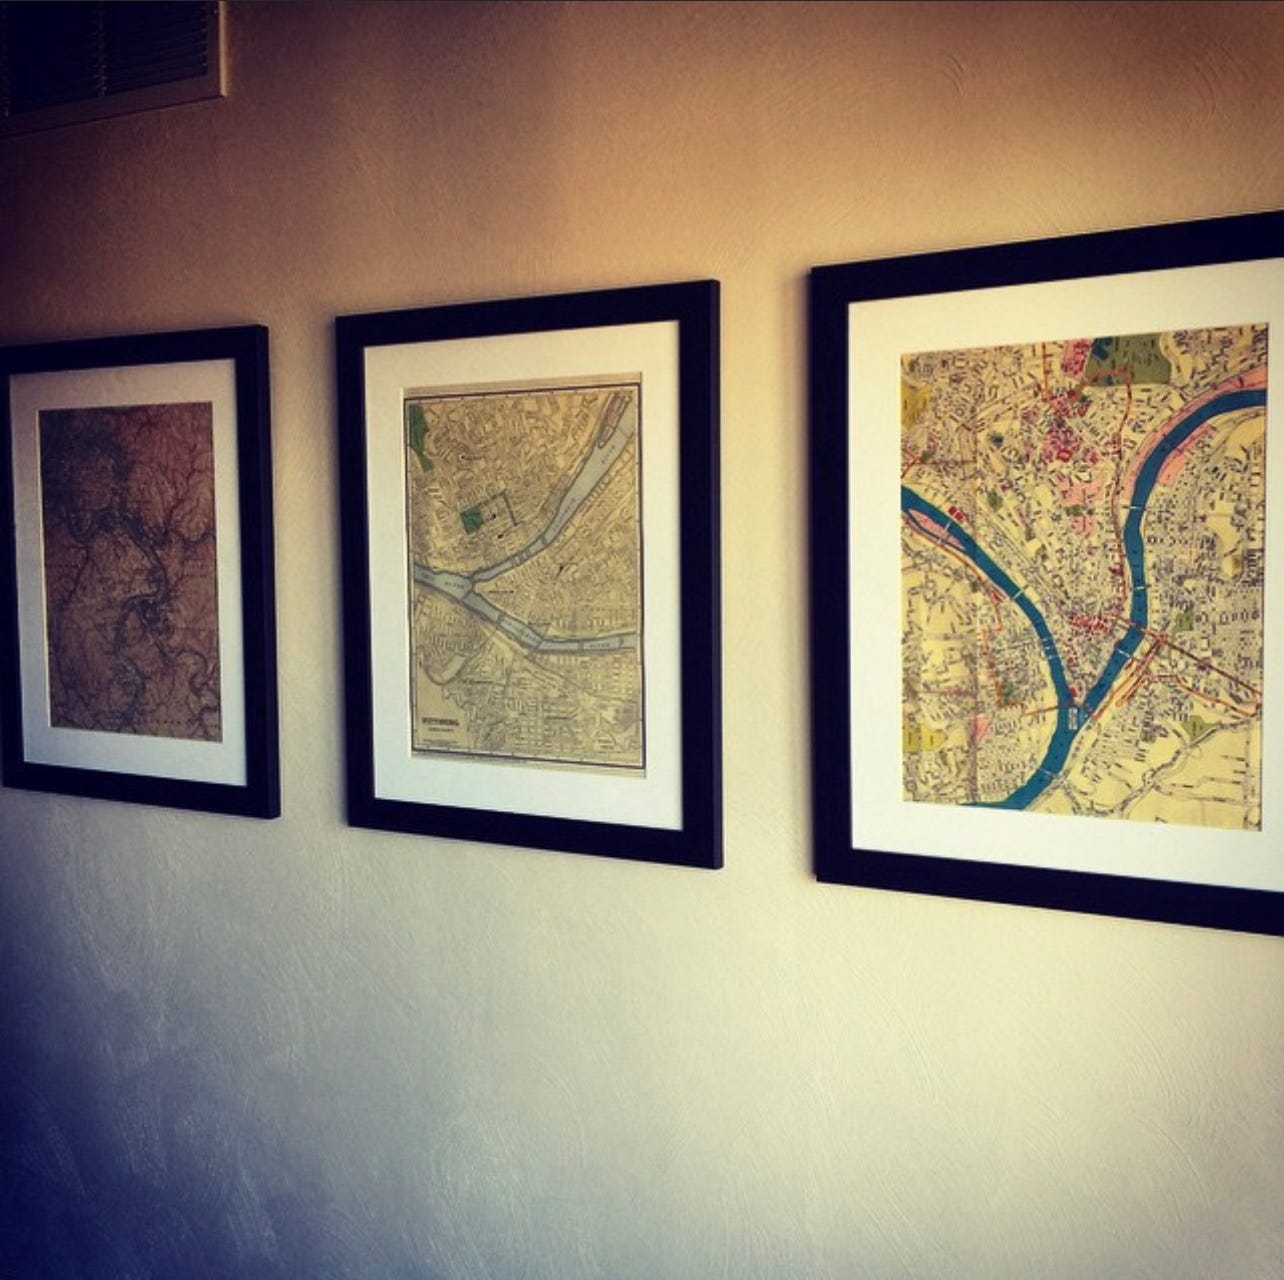 A wall with three framed maps of Pittsburgh's rivers and surrounding areas